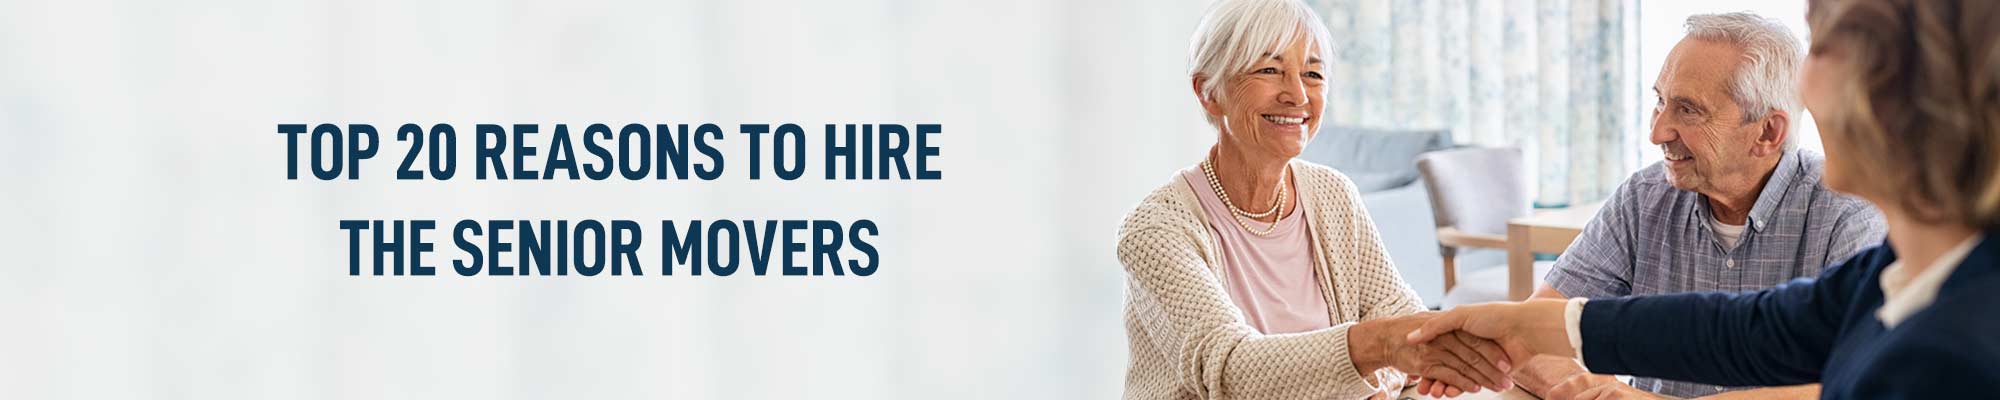 Top 20 Reasons to Hire The Senior Movers